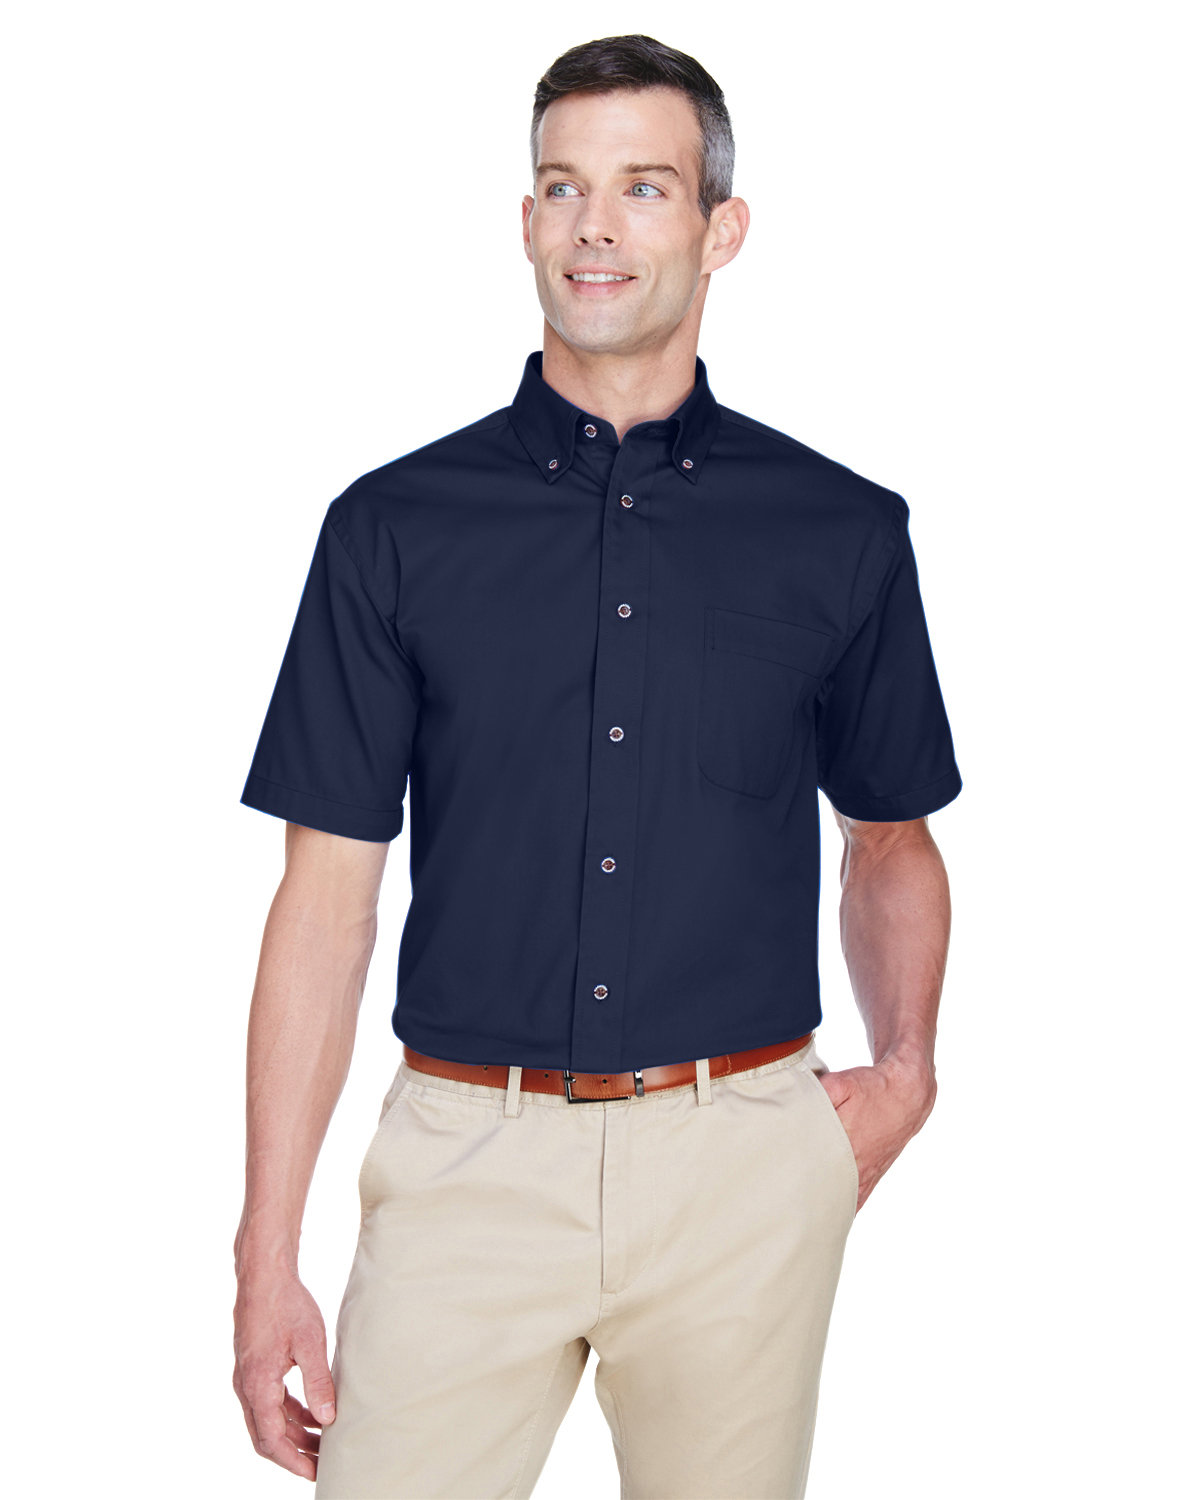 Men's Easy Blend™ Short-Sleeve Twill Shirt with Stain-Release - M500S